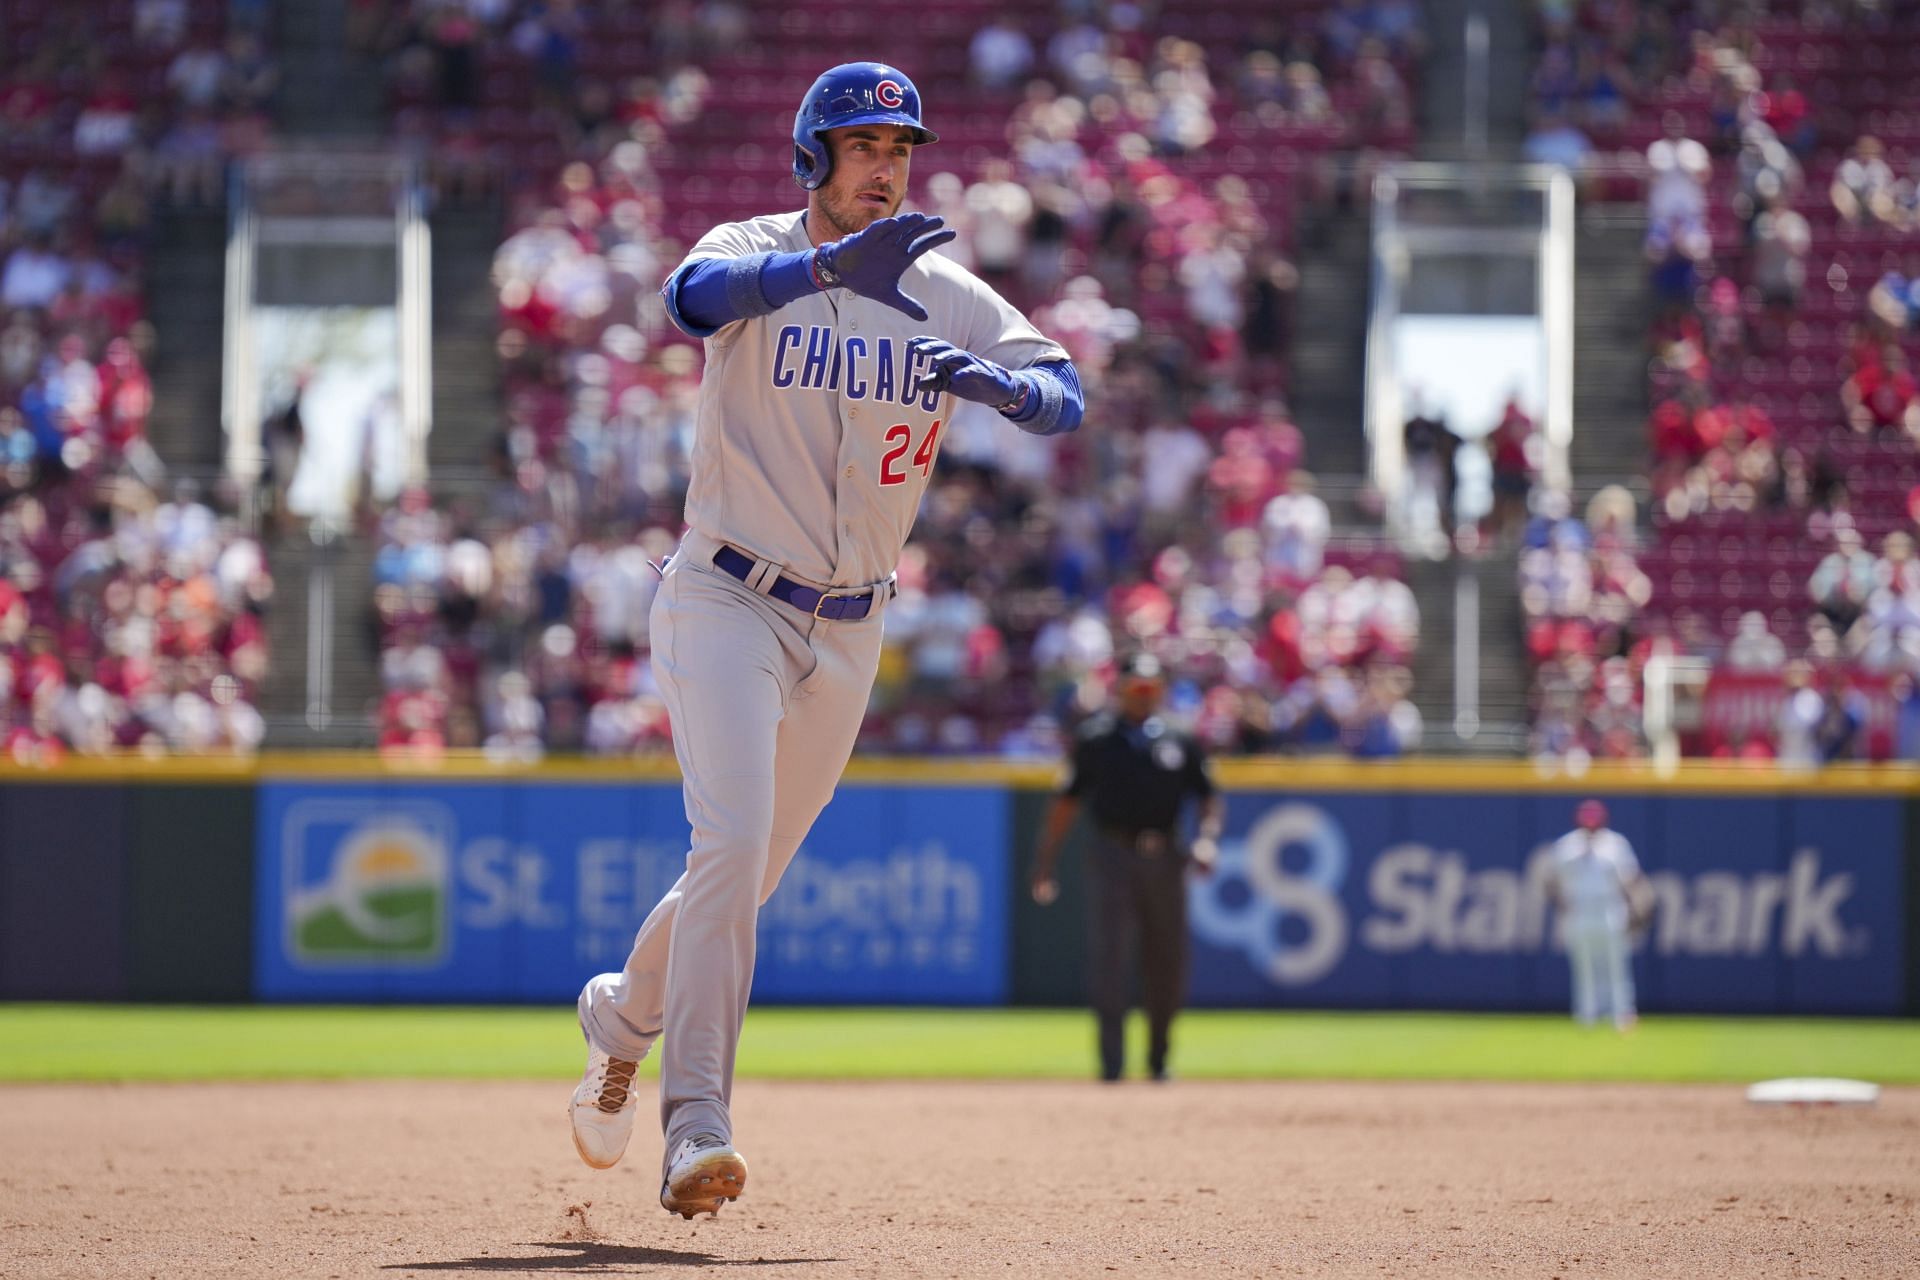 Cody Bellinger may be in line for big deal in MLB free agency